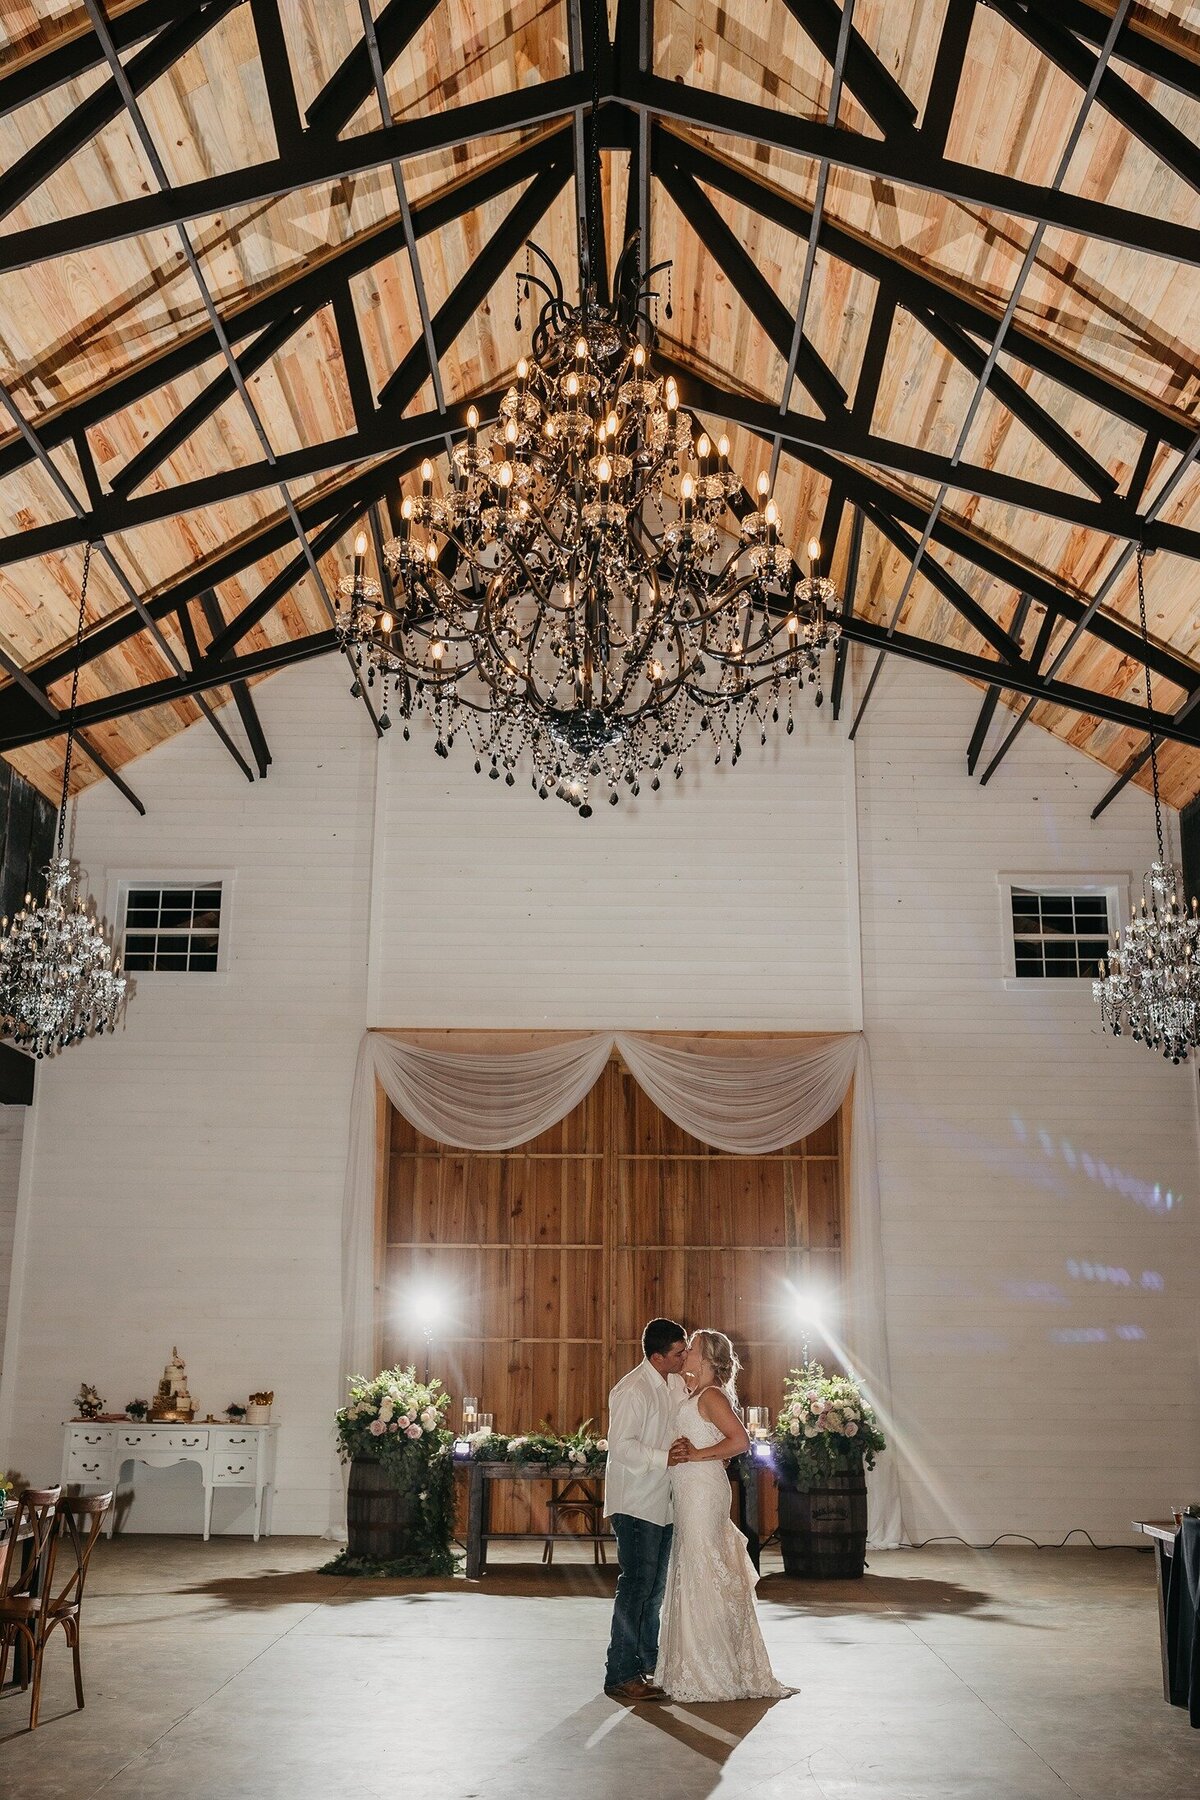 Legacy at Oak Meadows Wedding Venue - Pierson - Gainesville Florida - Weddings and Events38